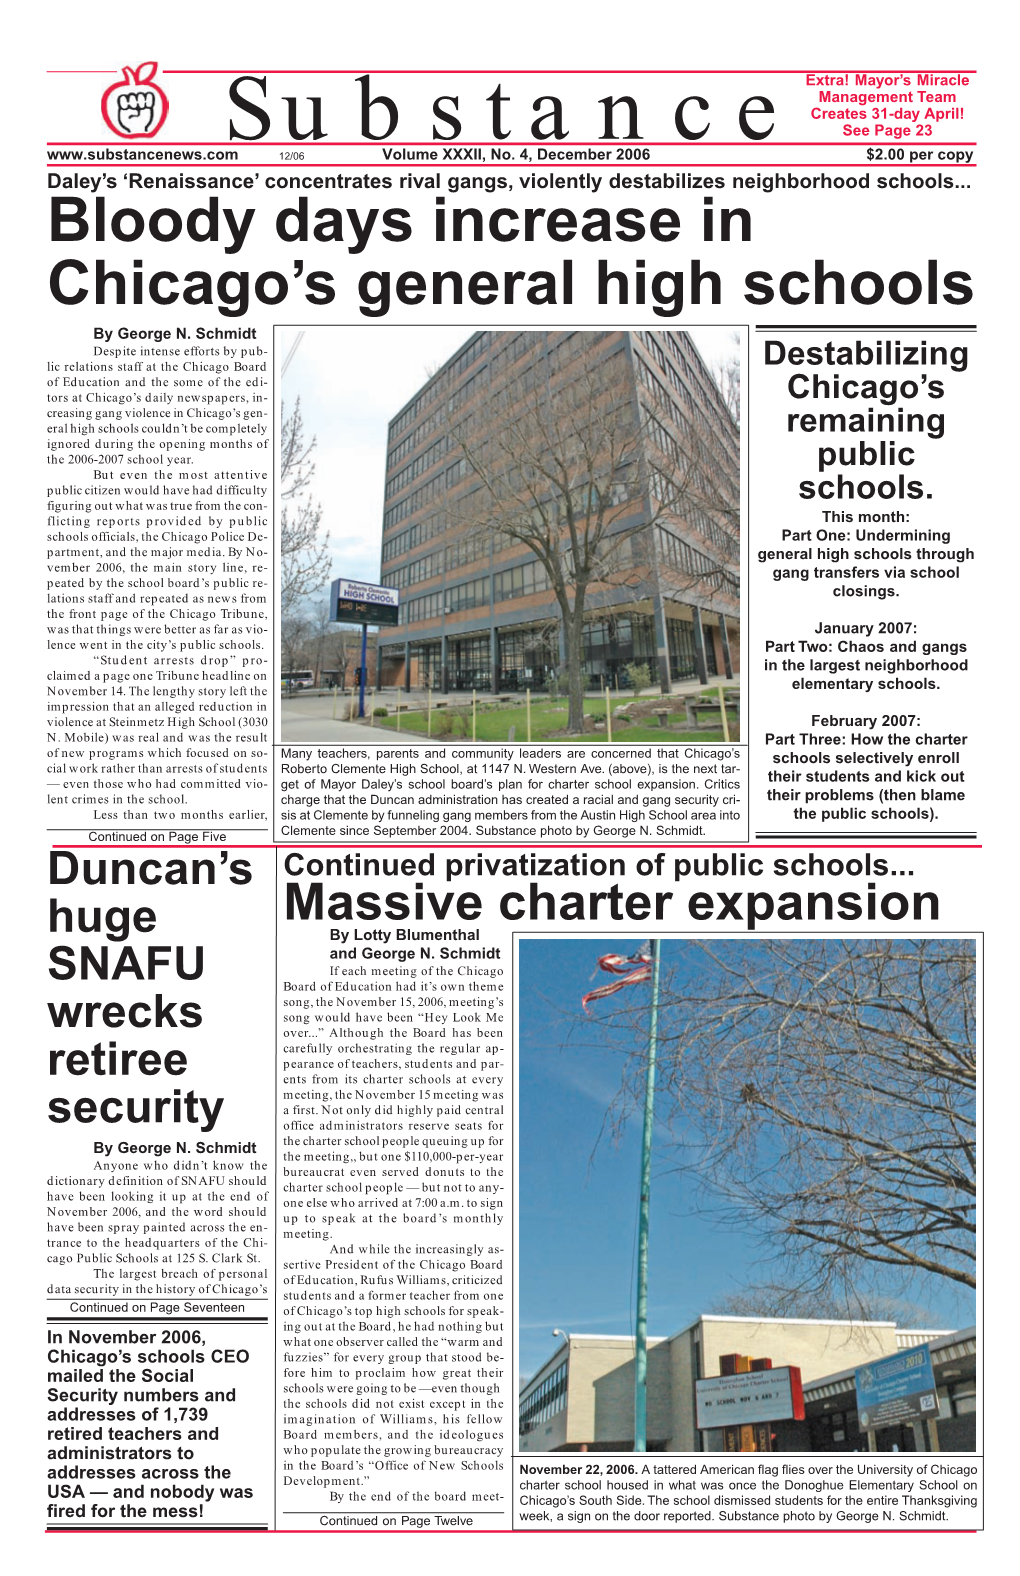 Bloody Days Increase in Chicago's General High Schools